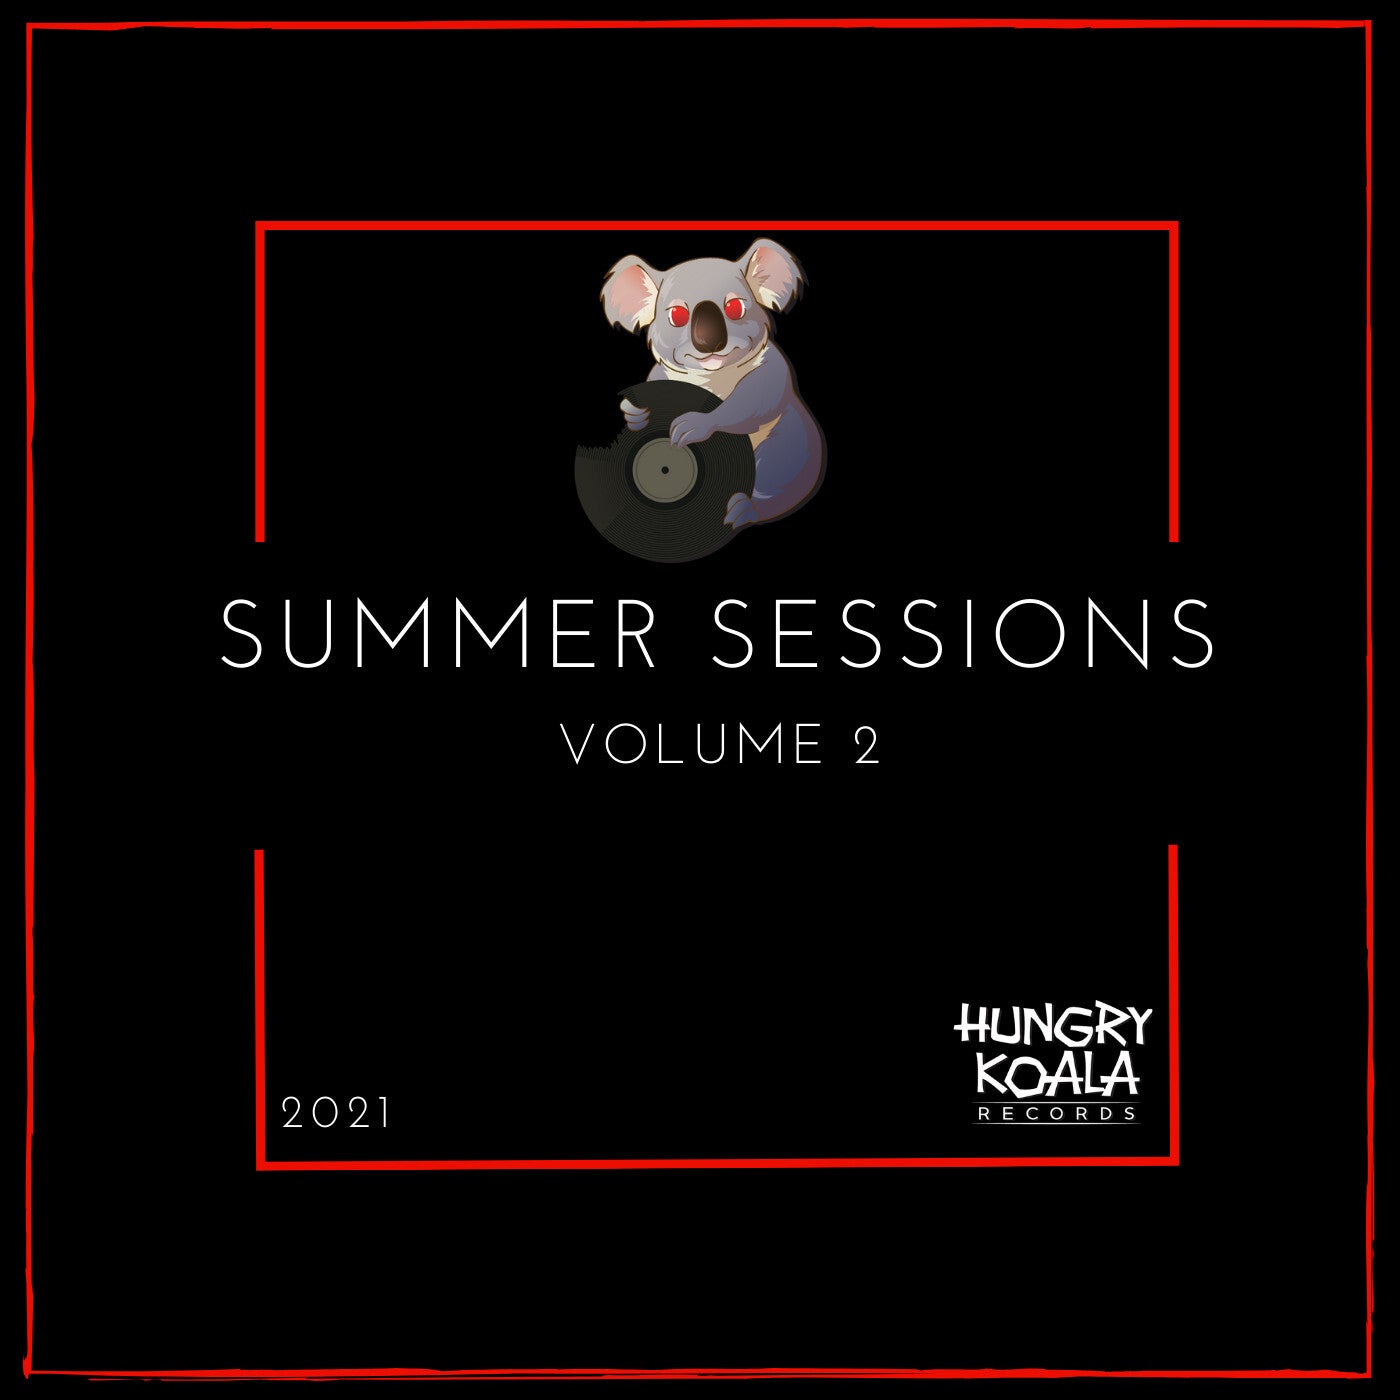 Summer Sessions Volume 2, 2021